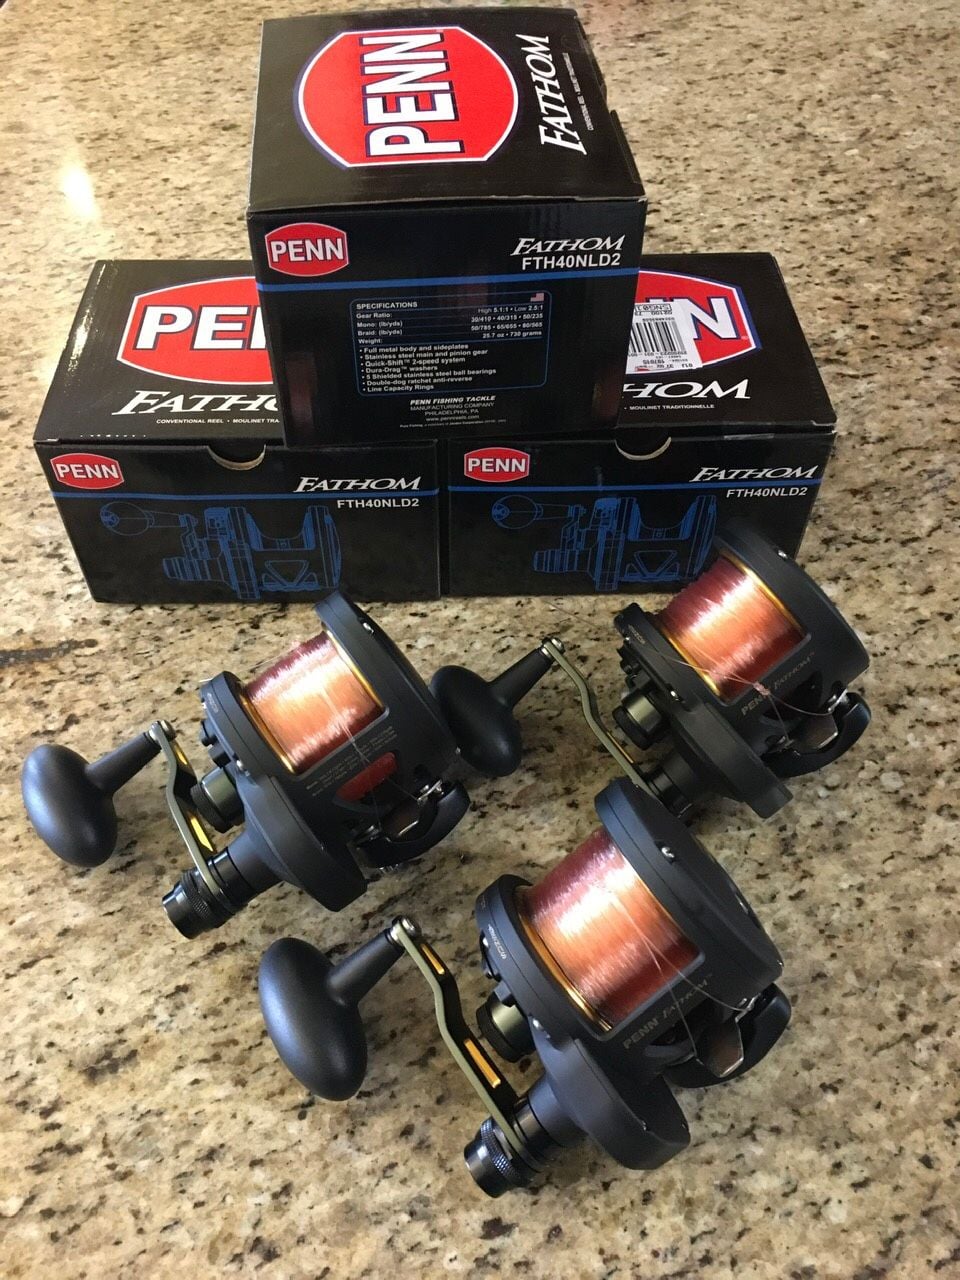 Penn Fathom 40 2-speed reels - The Hull Truth - Boating and